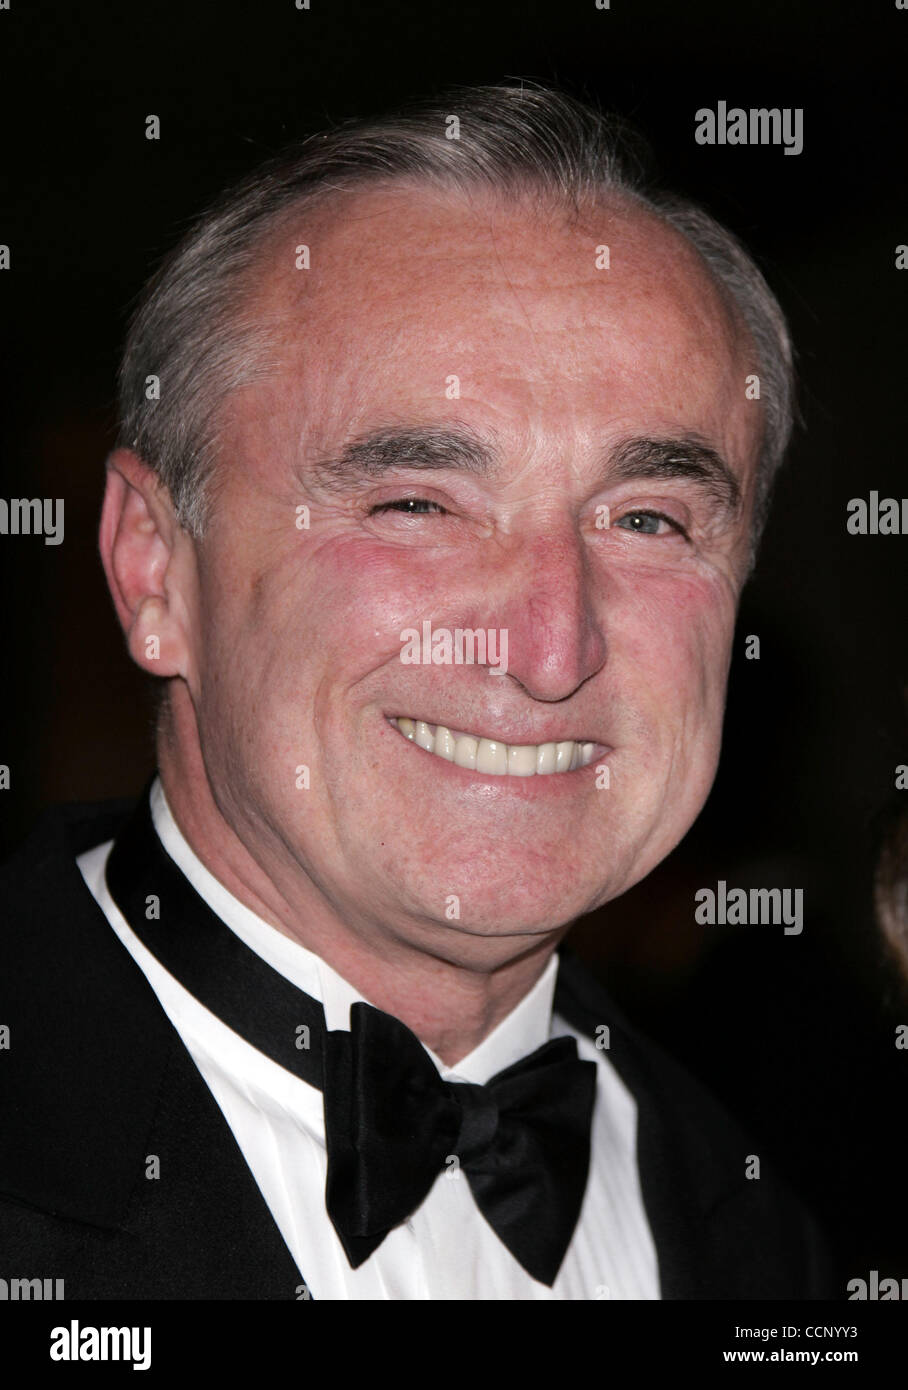 Oct 23, 2004; Beverly Hills California, USA; Police Chief WILLIAM BRATTON at the 16th Annual Carousel Of Hope Gala held at the Beverly Hilton Hotel. Stock Photo